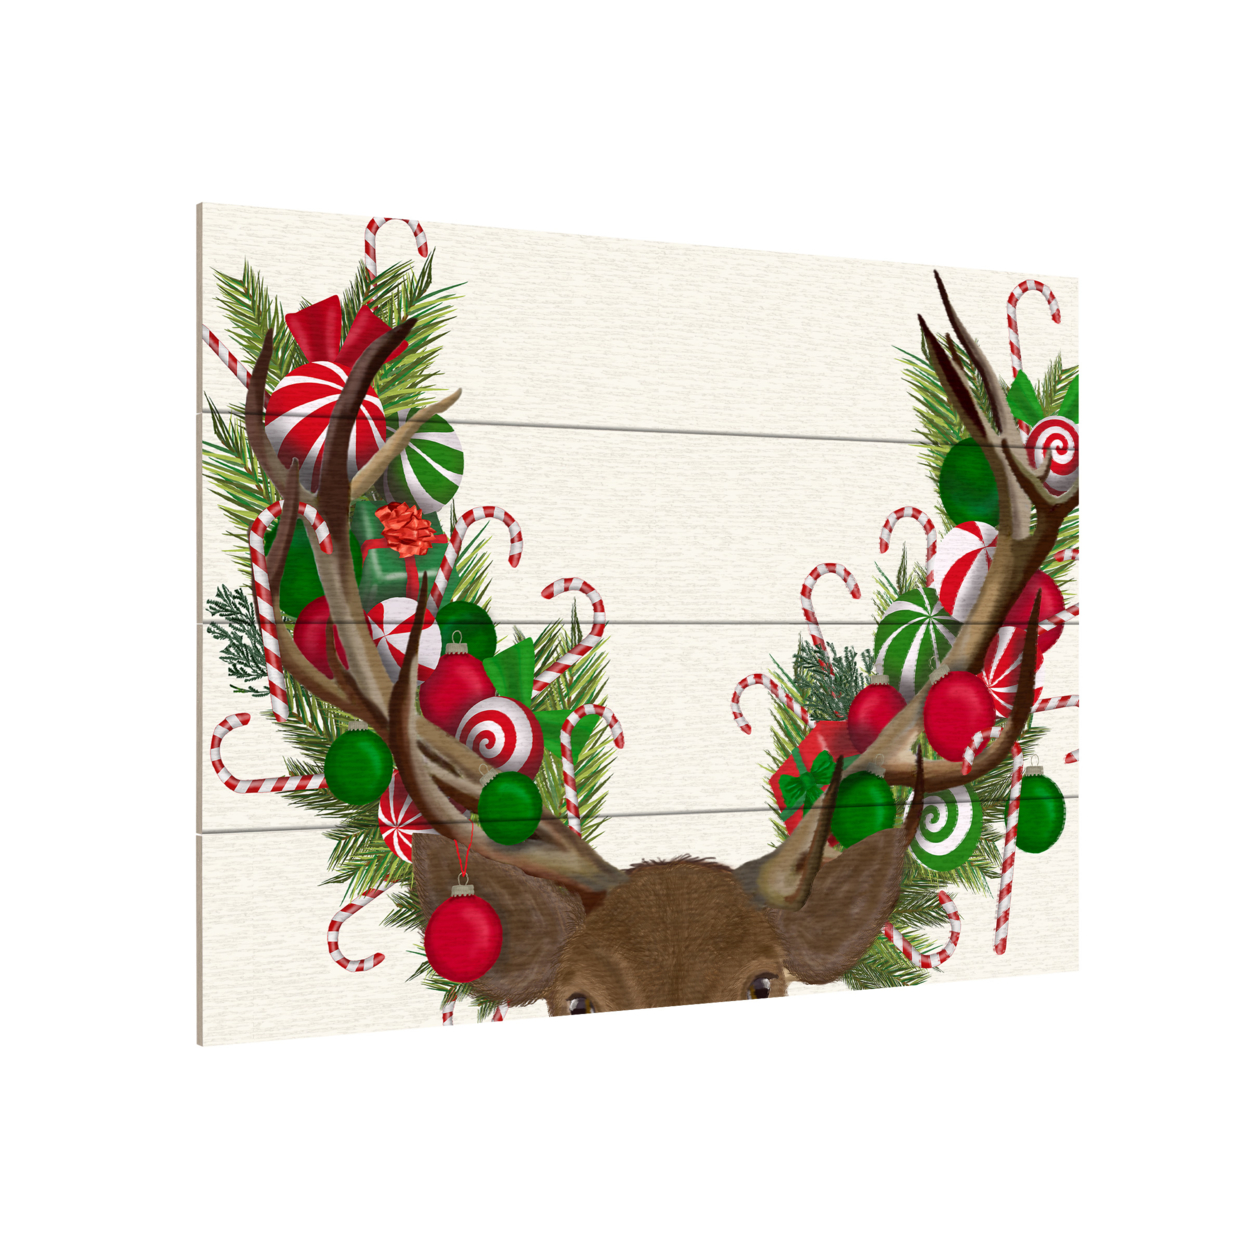 Wall Art 12 X 16 Inches Titled Deer, Candy Cane Wreath Ready To Hang Printed On Wooden Planks